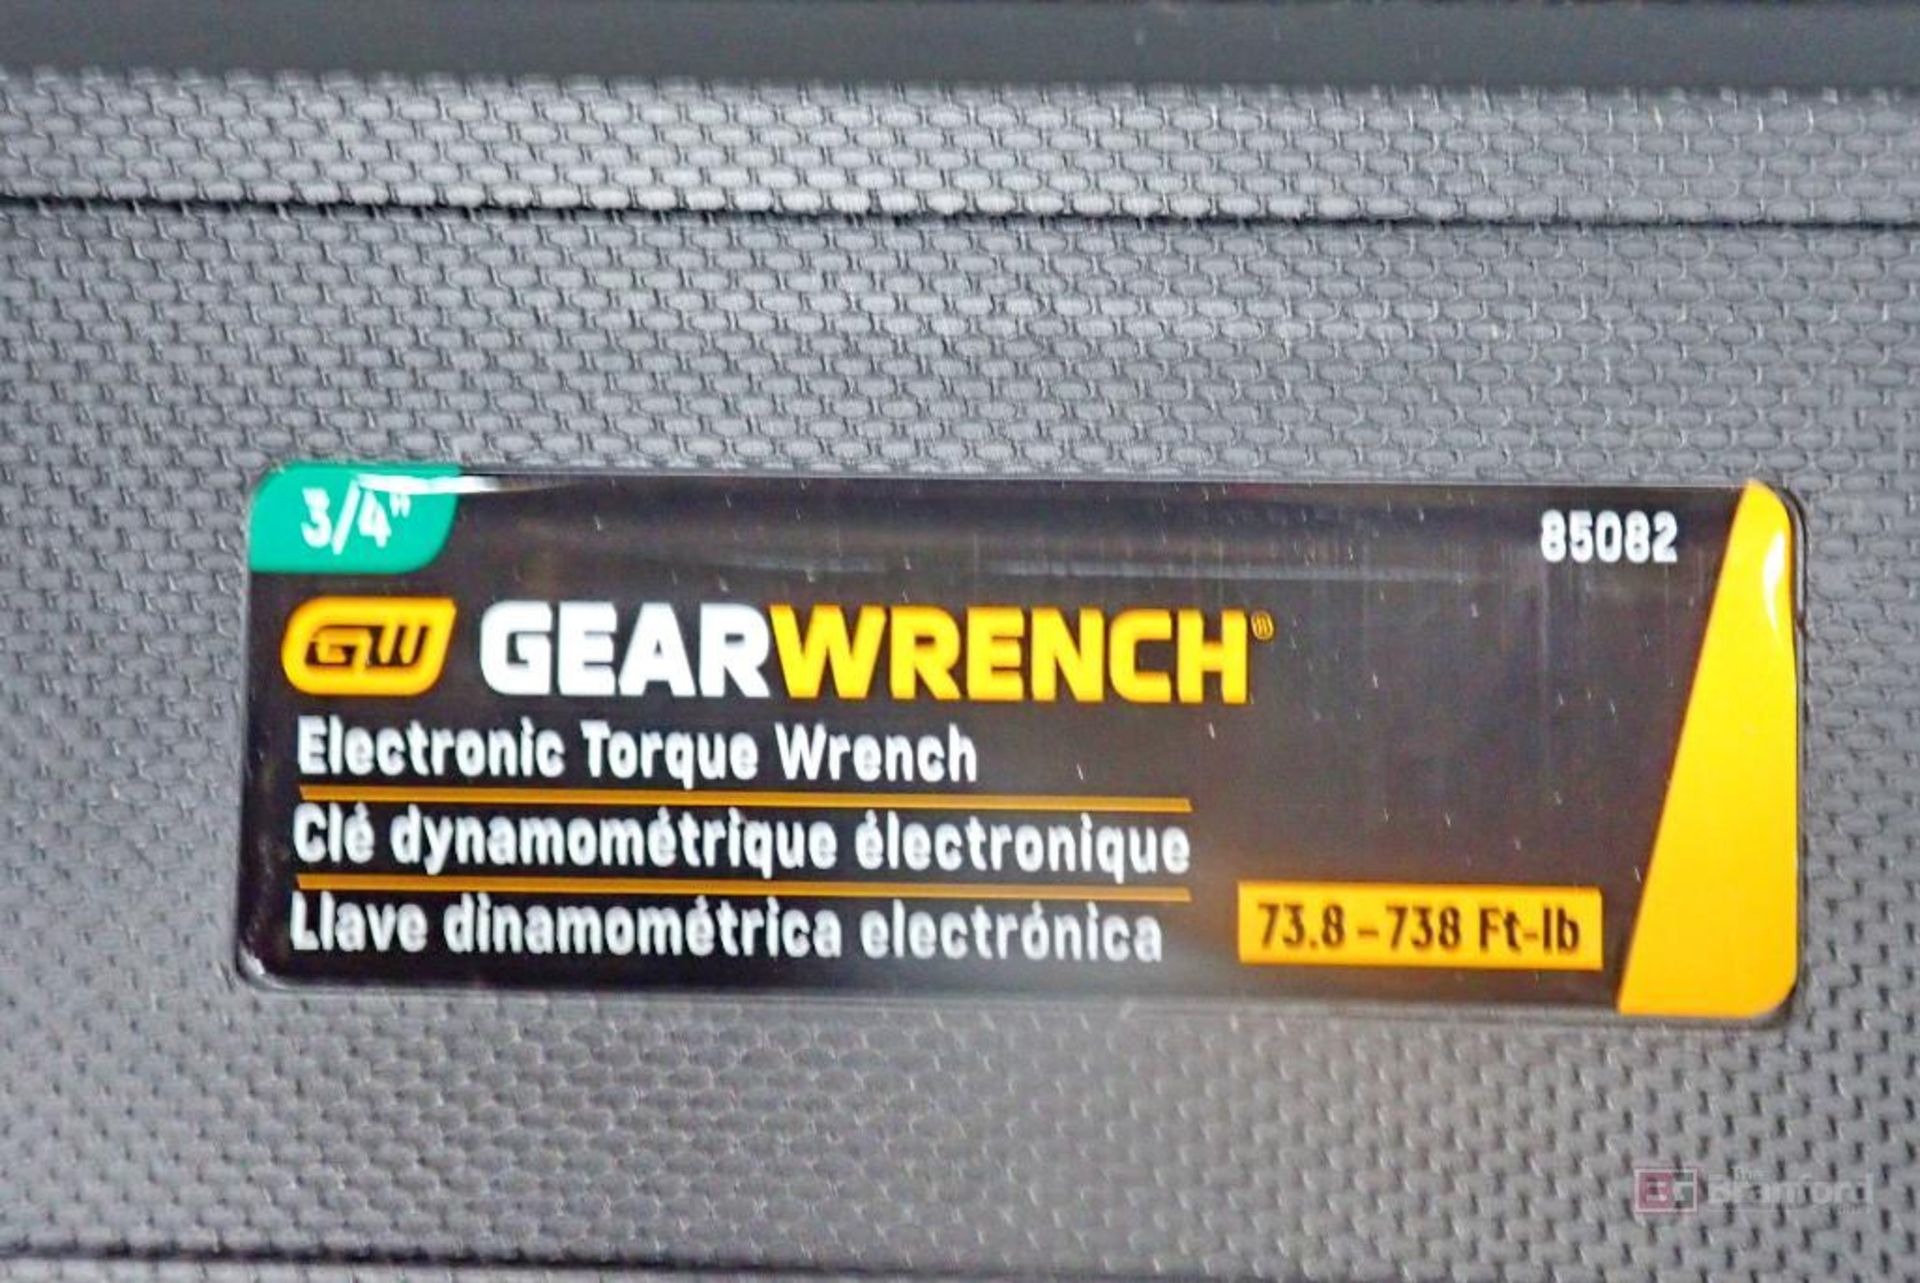 GearWrench 85082 3/4" Drive Electronic Torque Wrench - Image 3 of 4